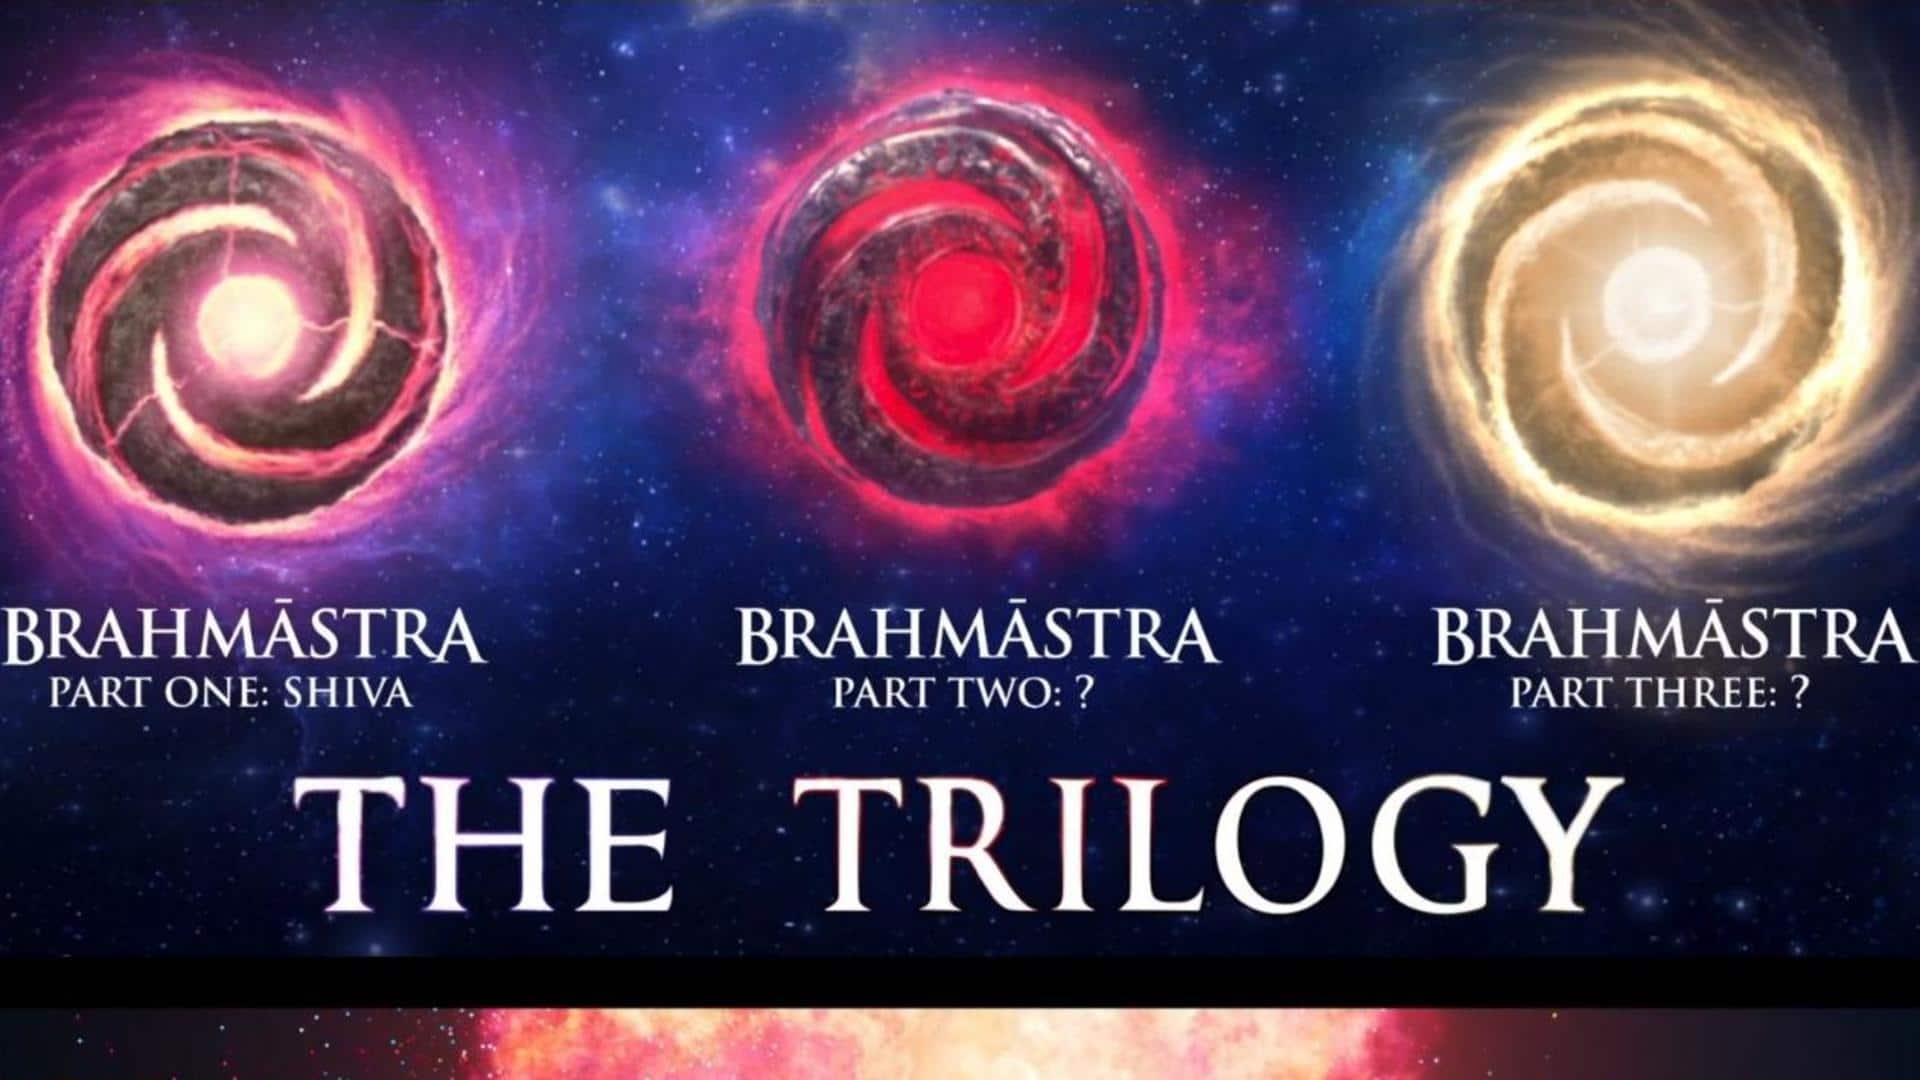 Ayan Mukerji shares timeline for 'Brahmastra' Part Two and Three